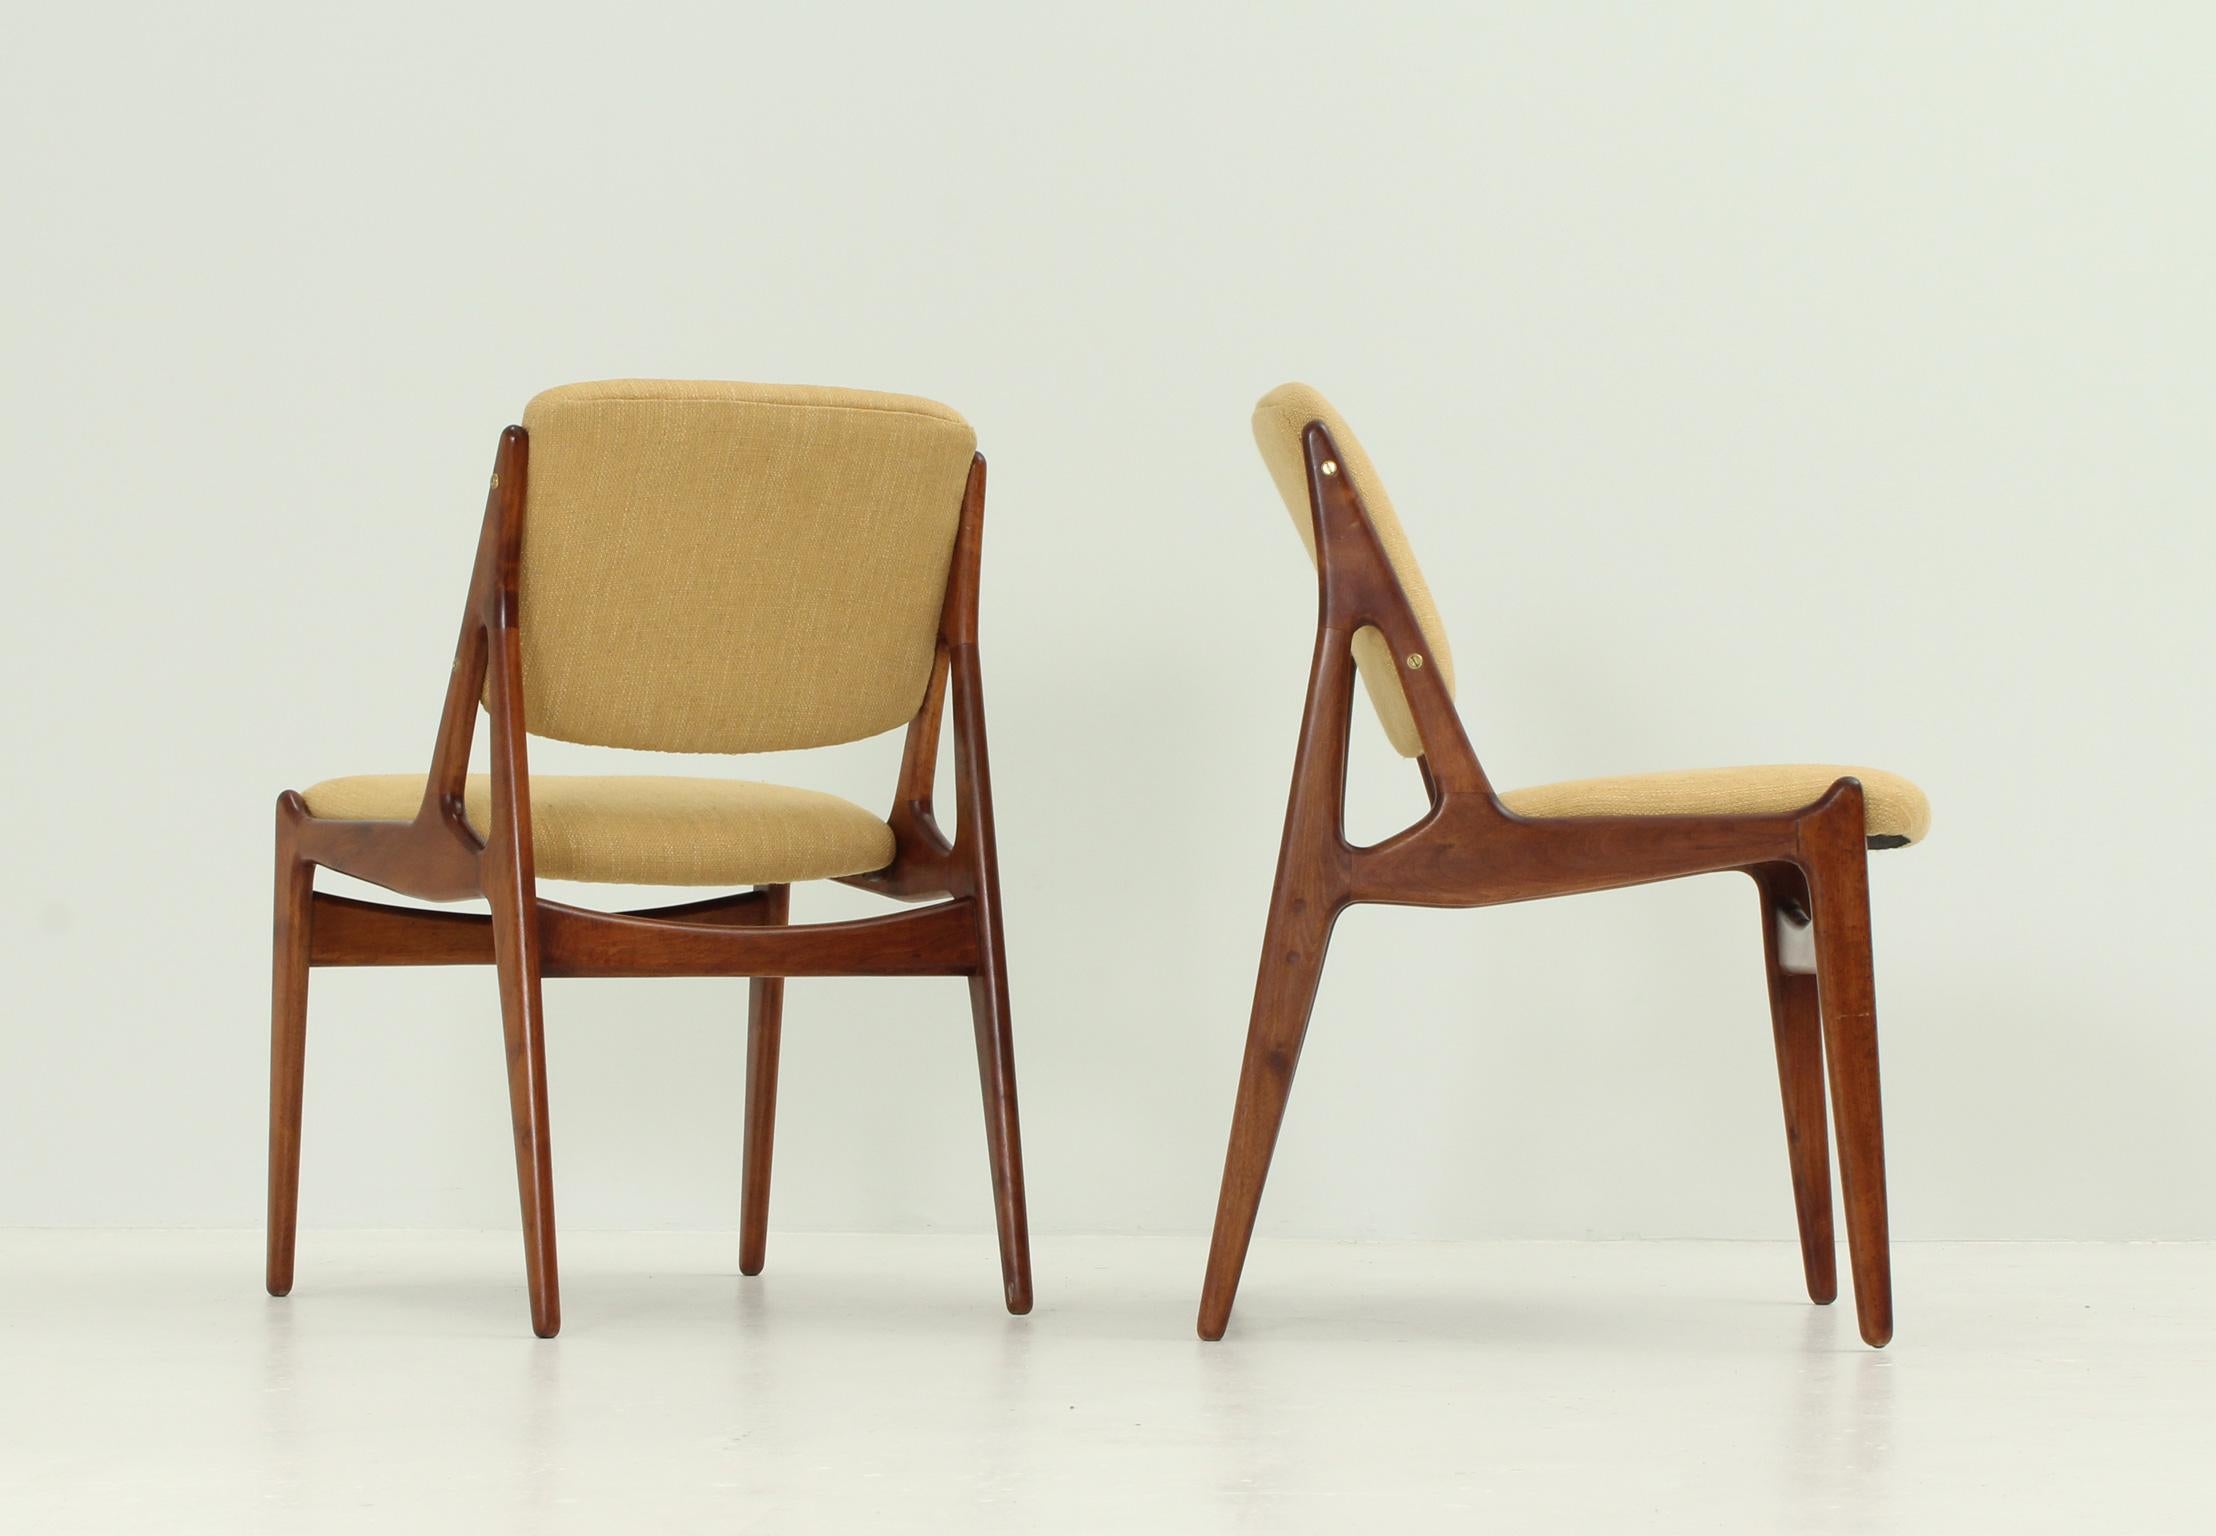 A pair of Ella chairs designed in 1962 by Arne Vodder for Vamo, Denmark. Teak wood and new upholstery.